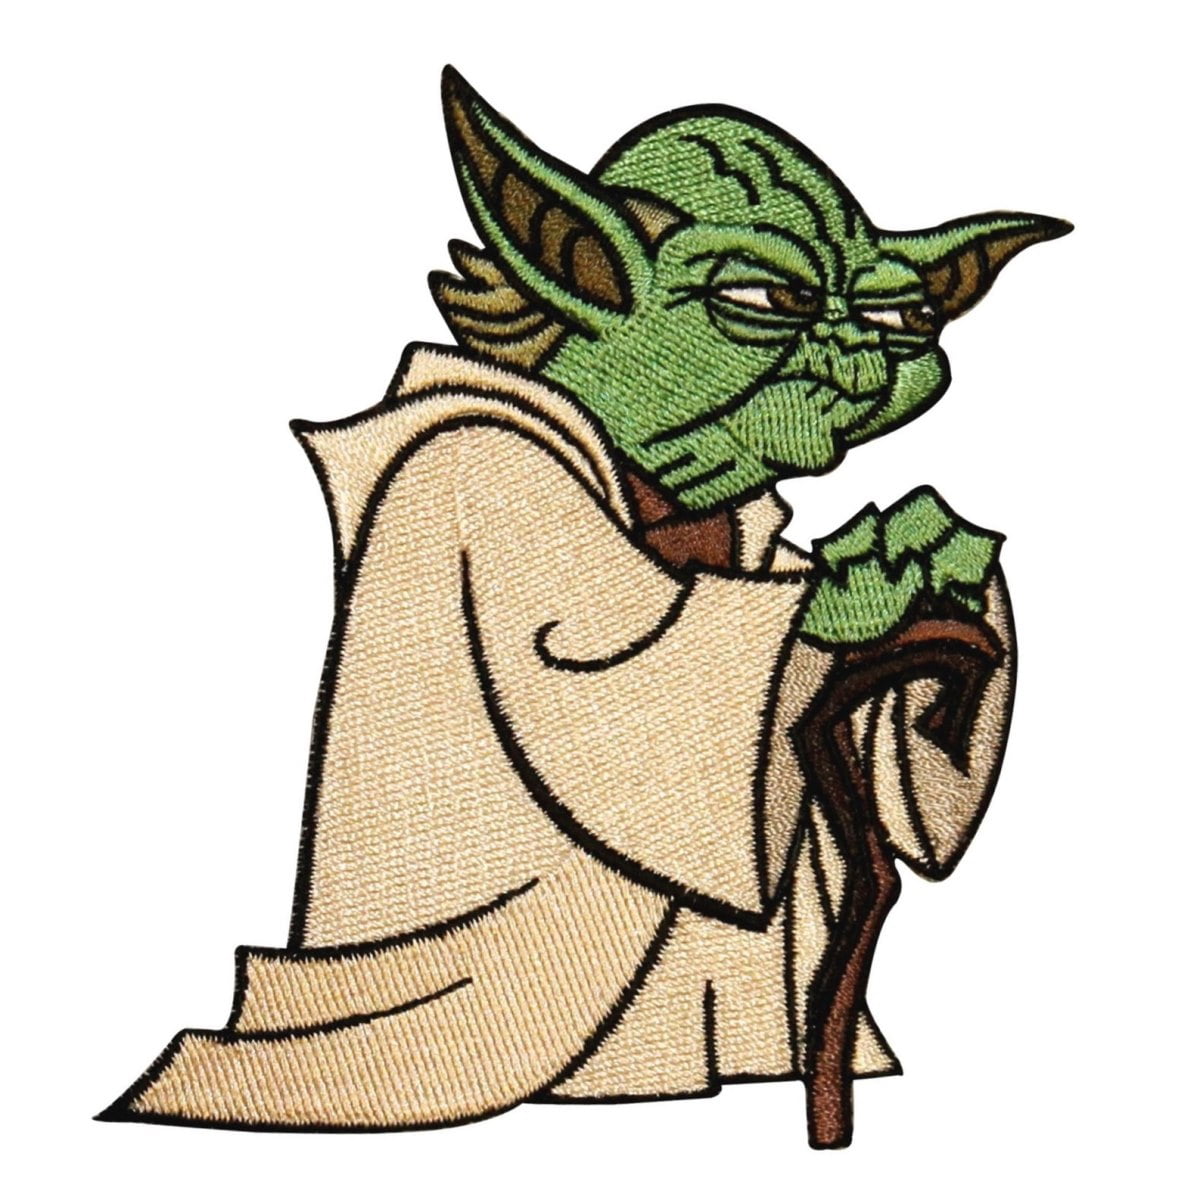 Star Wars: Embroidered Iron Cartoon Patch / Applique Crest Iron Ironing  vader, Yoda, Lucas Film 